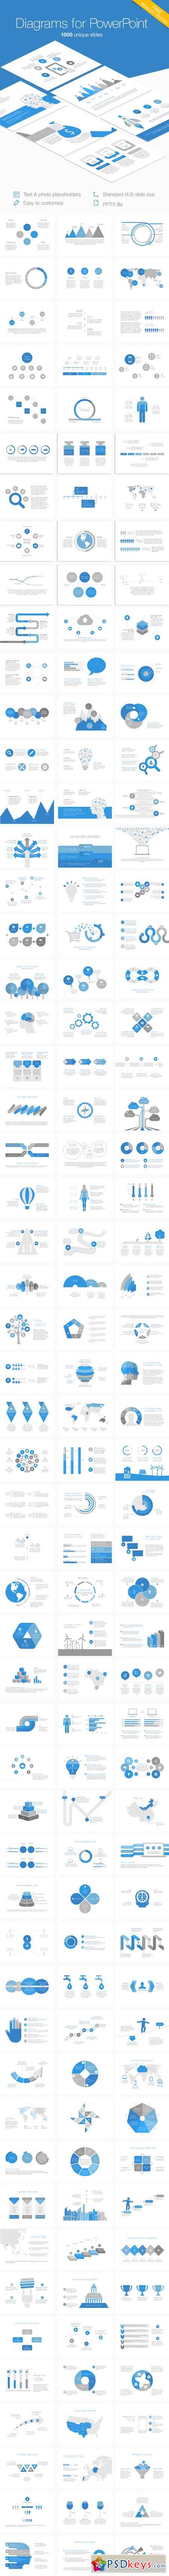 Diagrams for PowerPoint 7819833